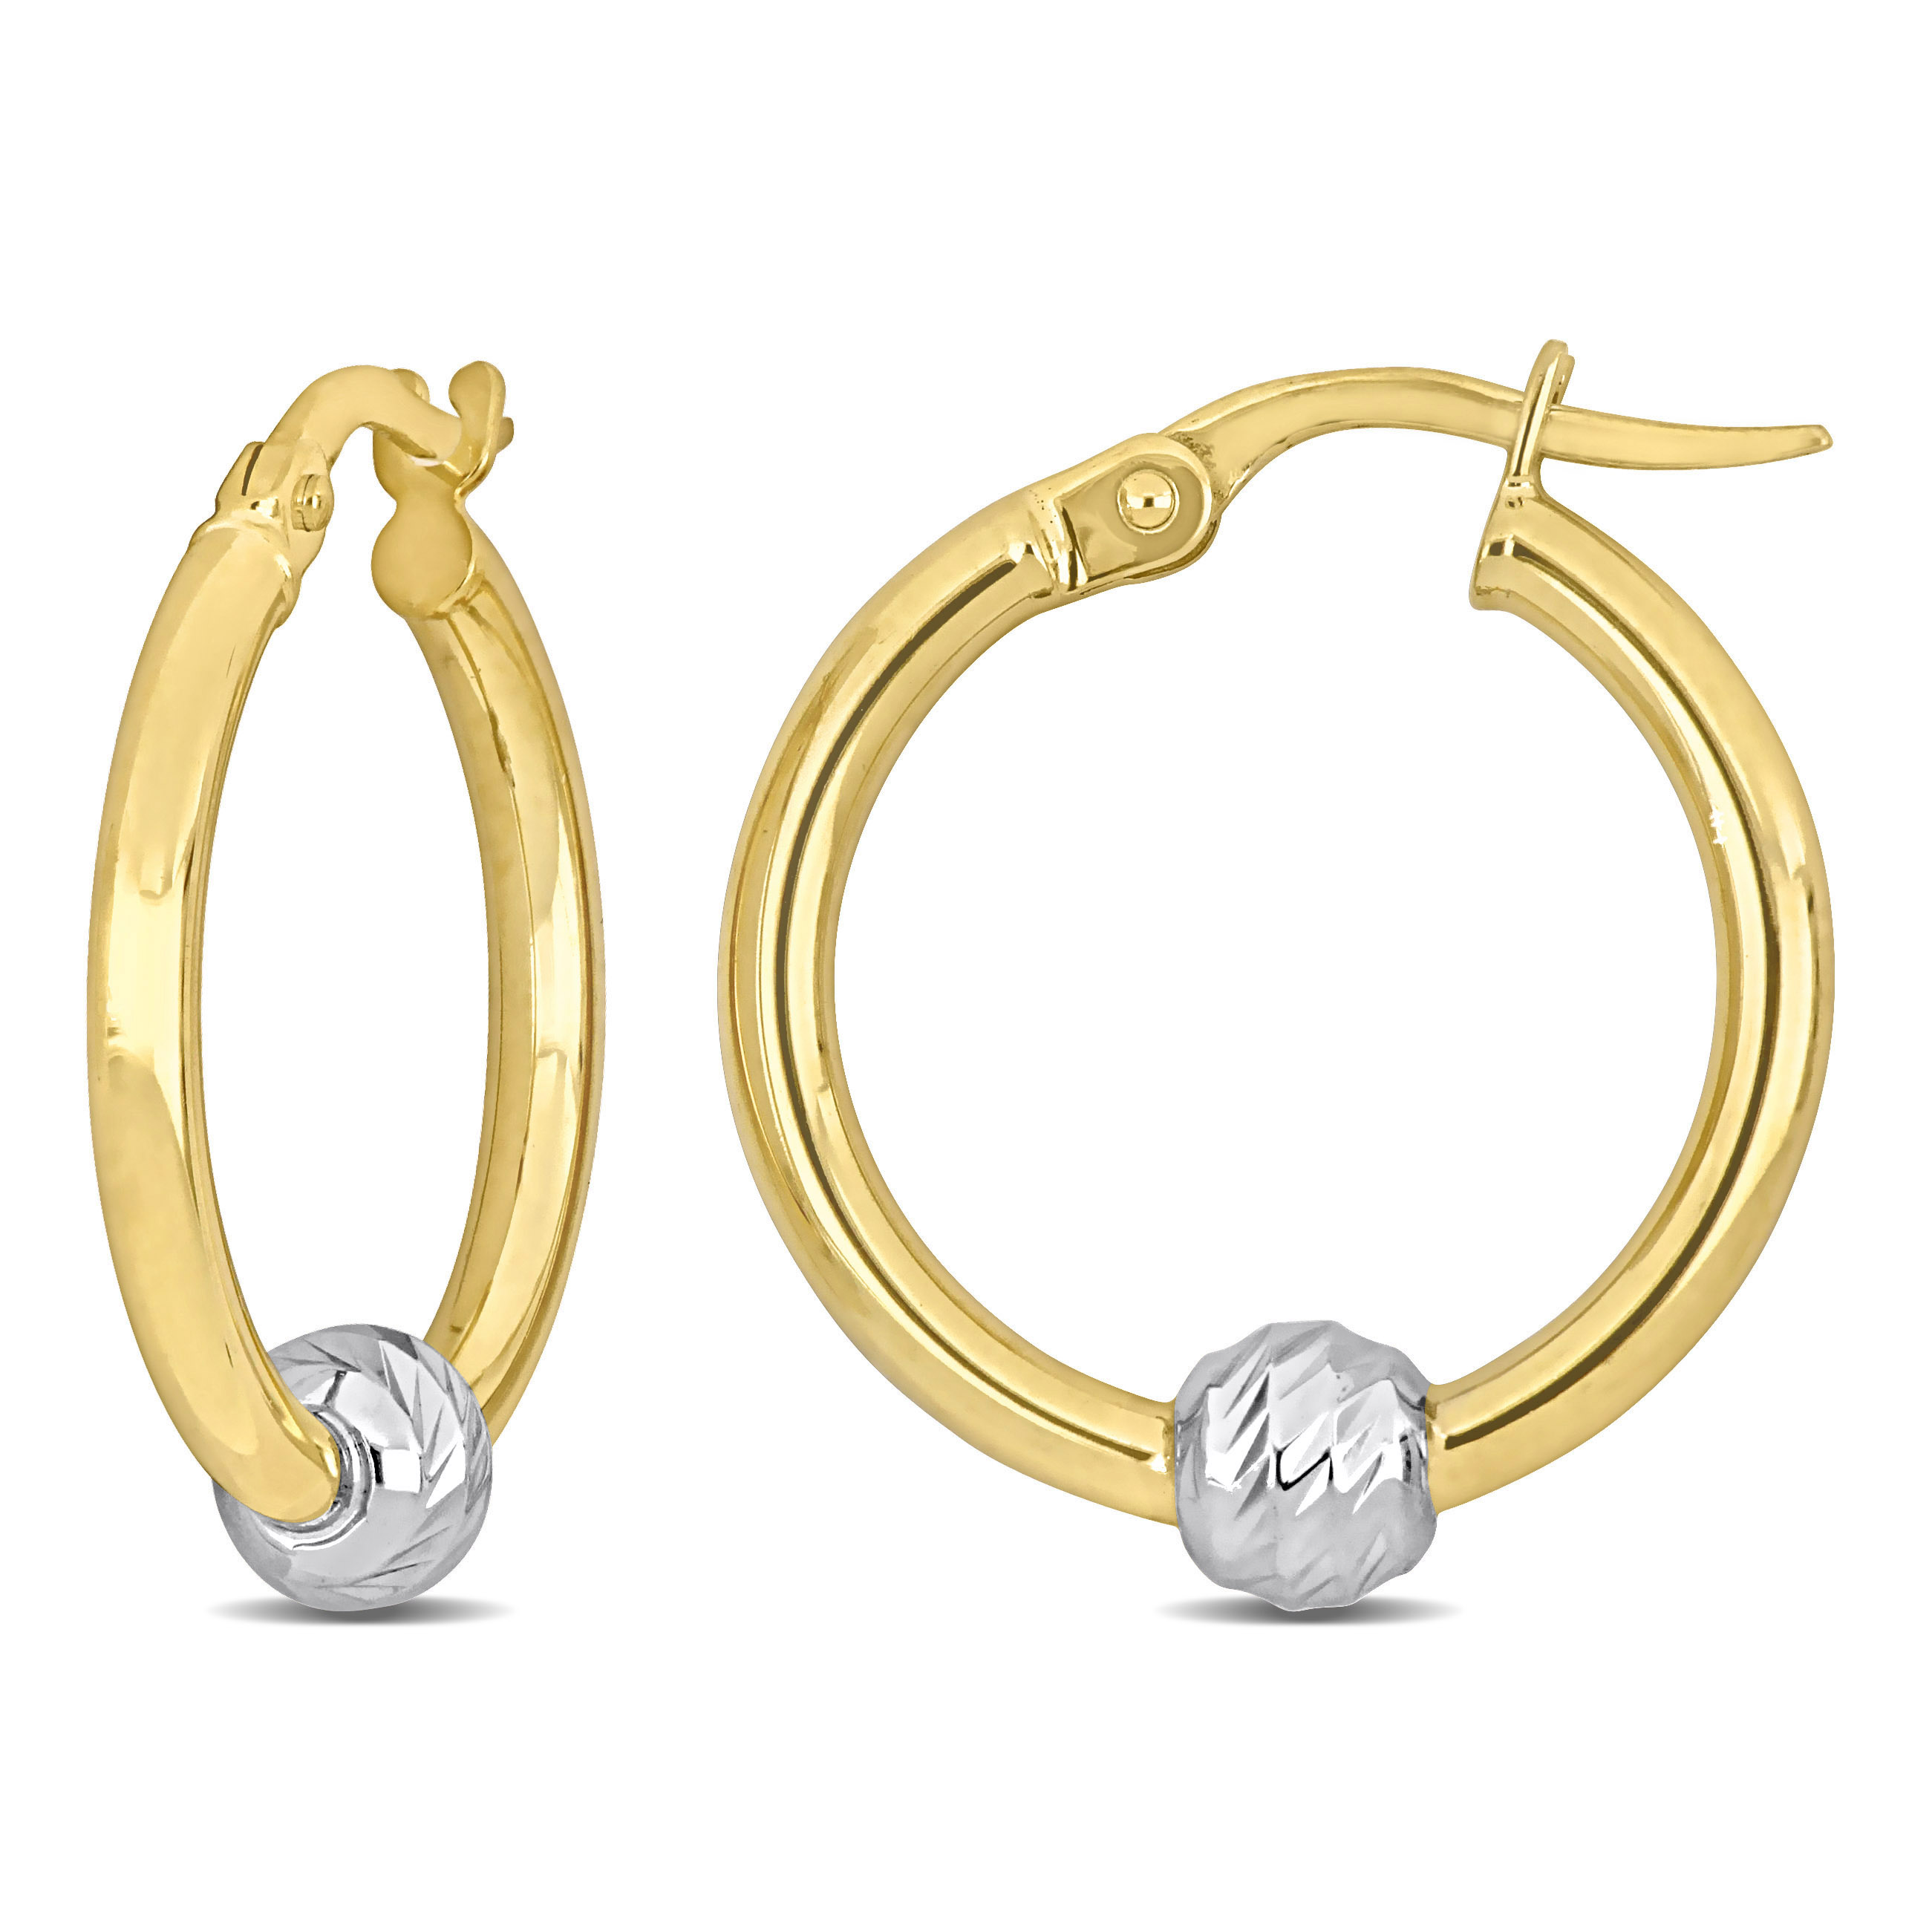 21 MM Hoop Earrings with Ball in 2-Tone 14k Yellow and White Gold